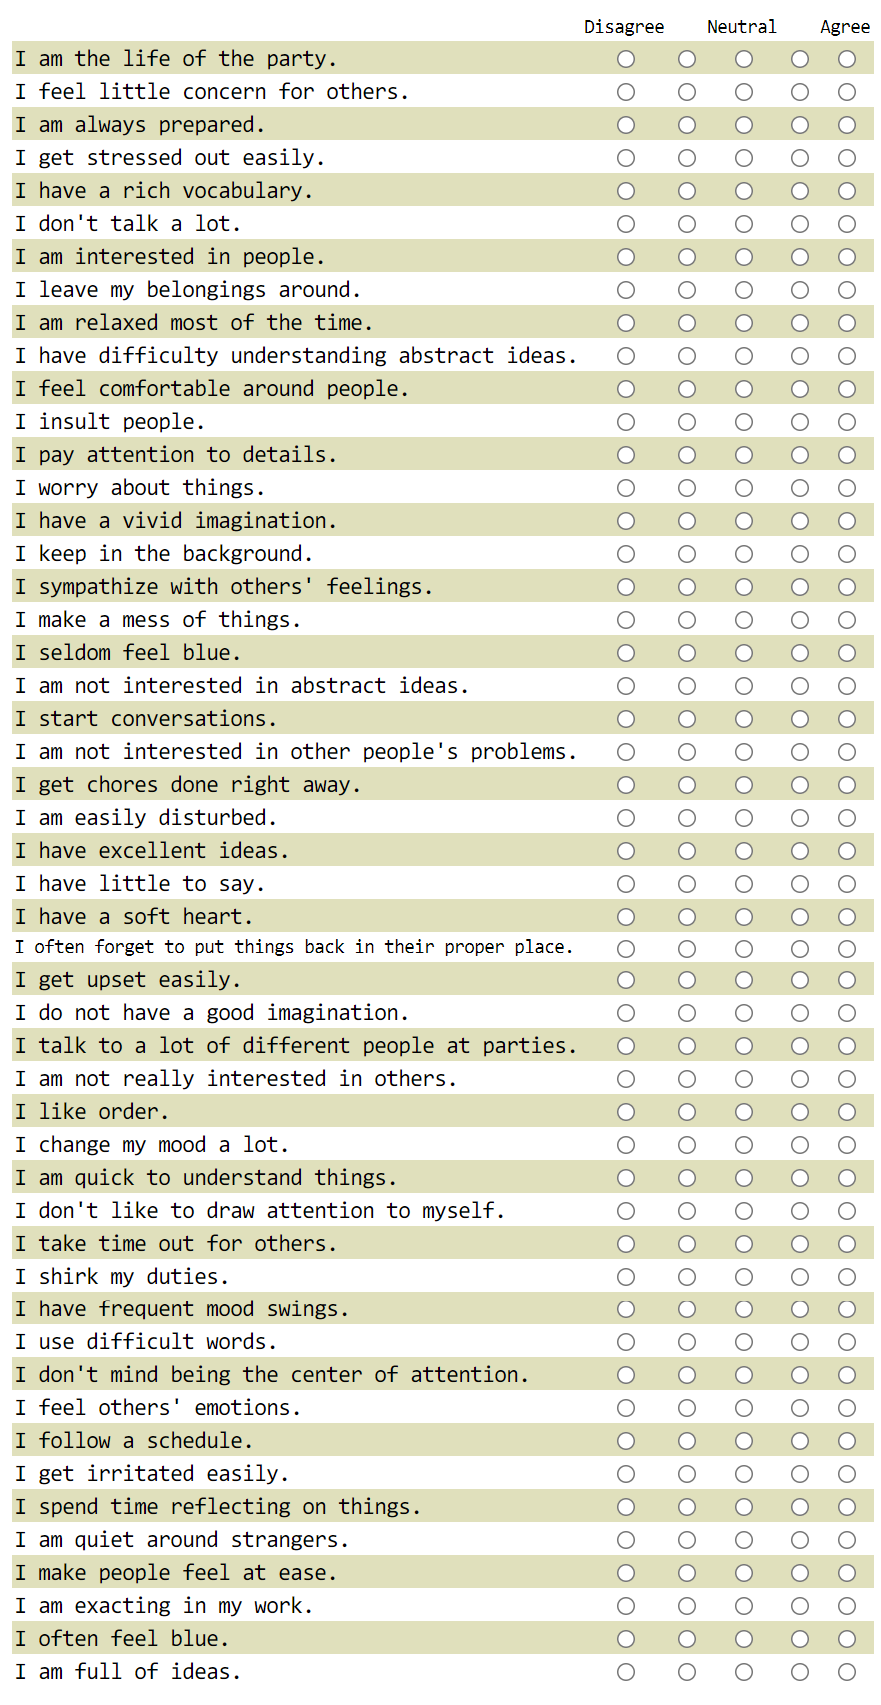 Figure 2: Questionnaire of personality test.